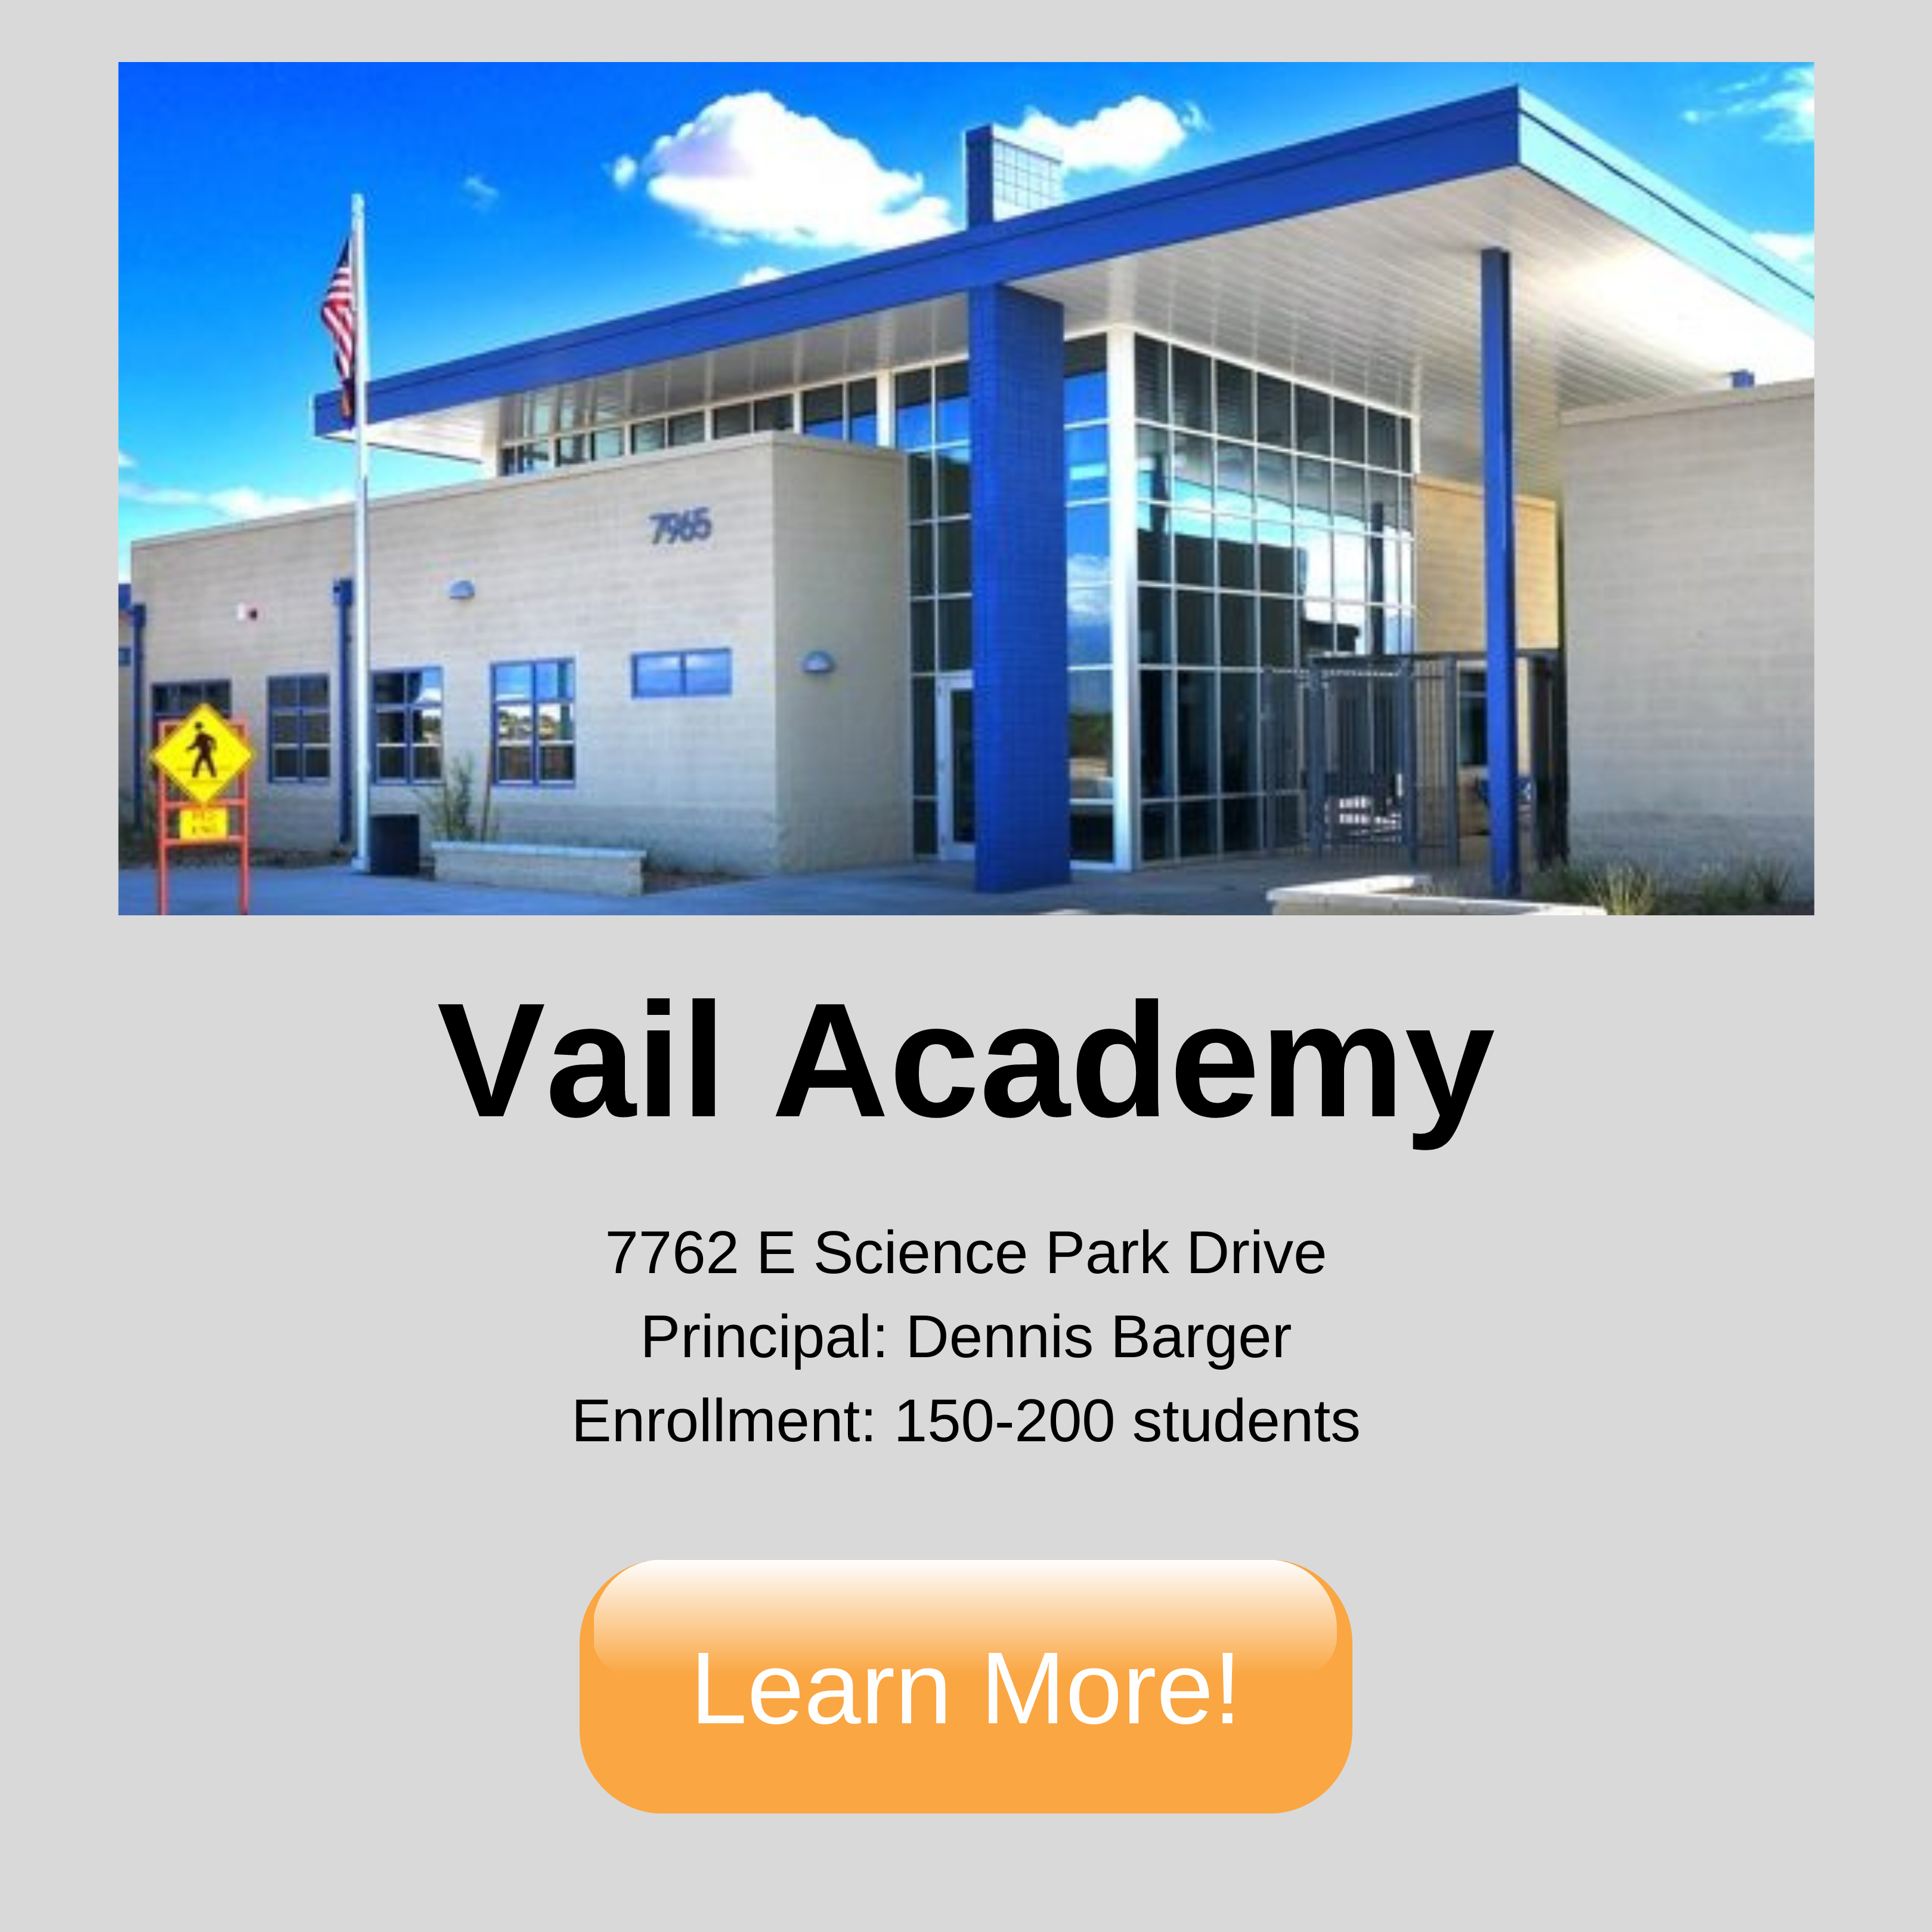 Vail Academy. 7762 E Science Park Drive Principal: Dennis Barger Enrollment: 150-200 students. Click to learn more.